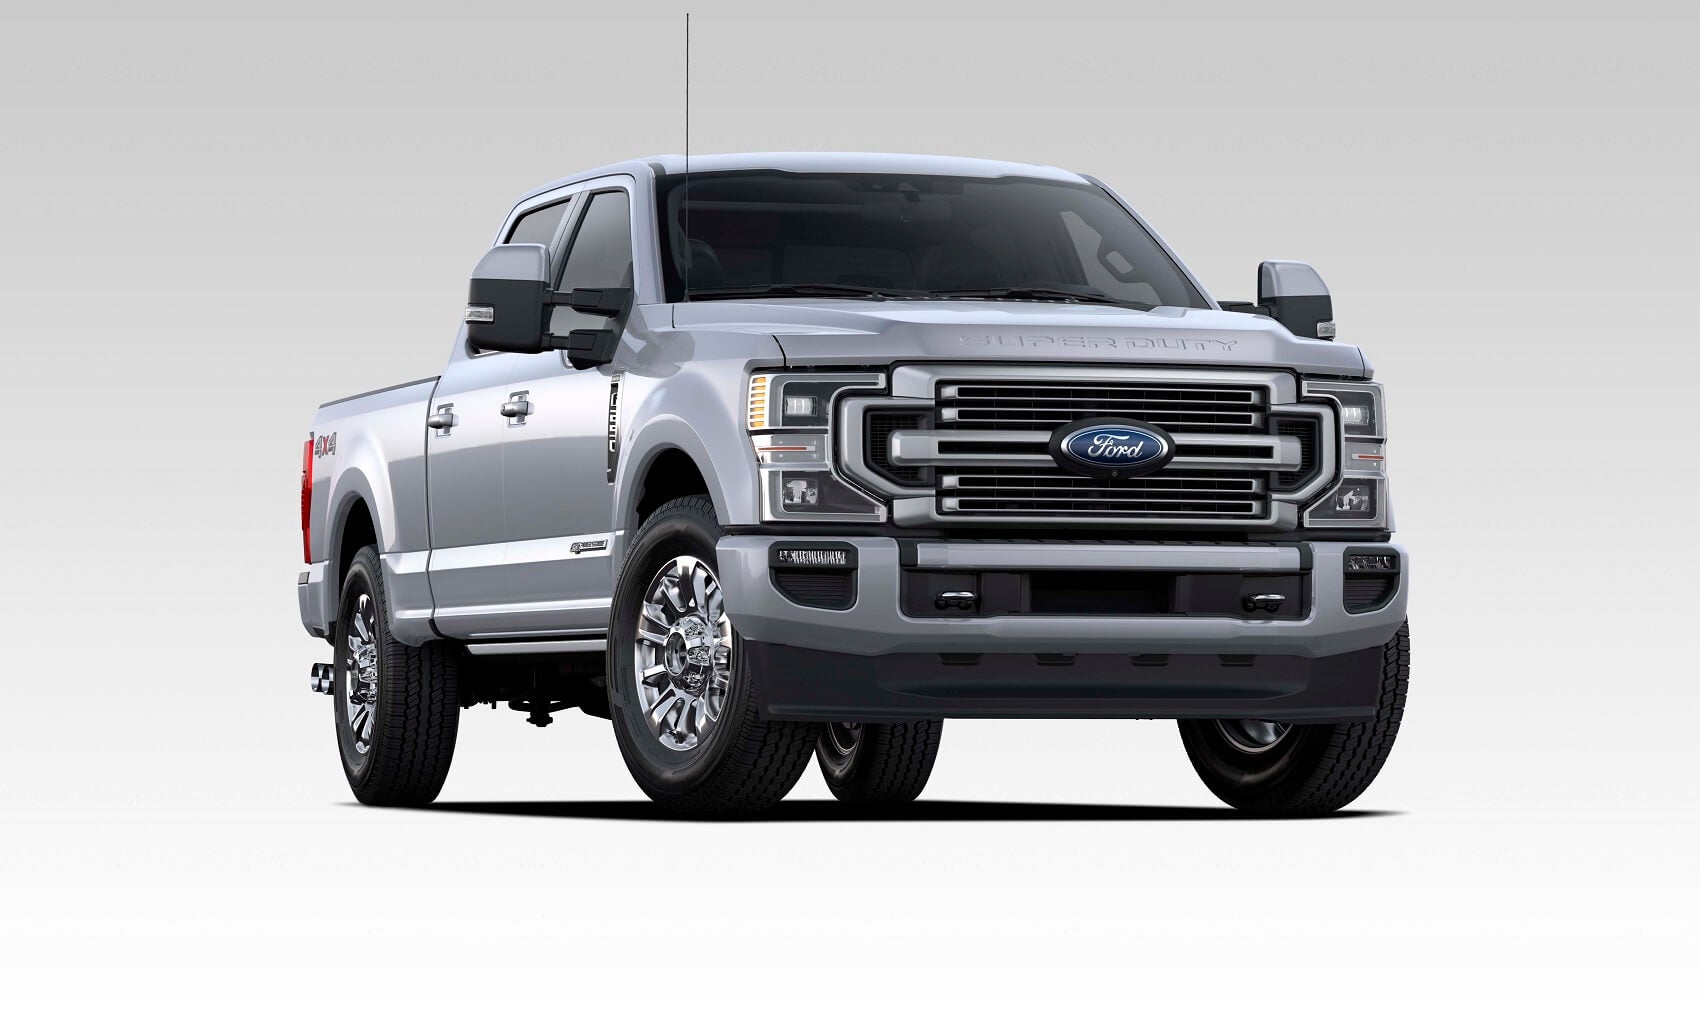 New light blue 2021 Ford Super Duty F-250 against a grey and white gradient background.